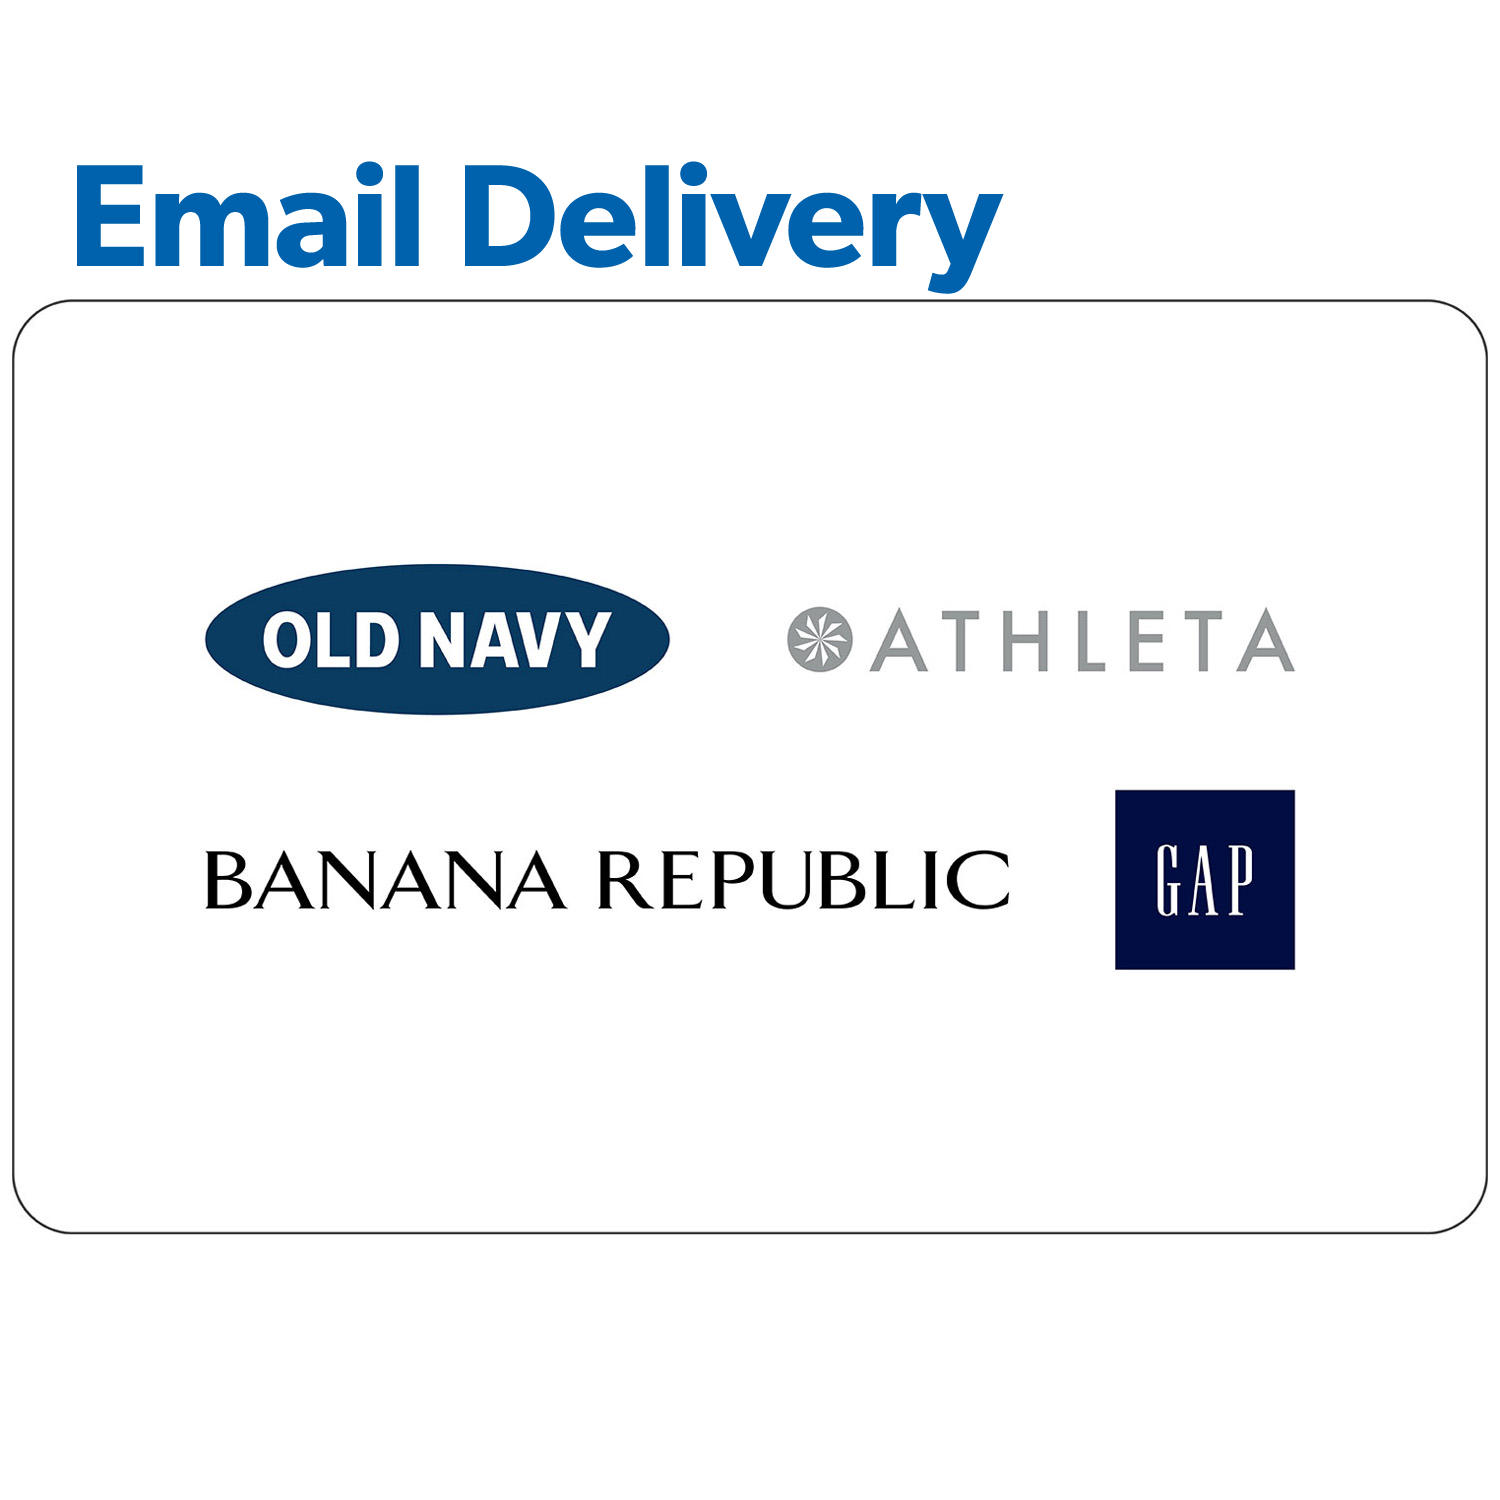 GAP Options (Gap, Old Navy, Banana Republic and, Athleta) $25 Email Delivery Gift Card